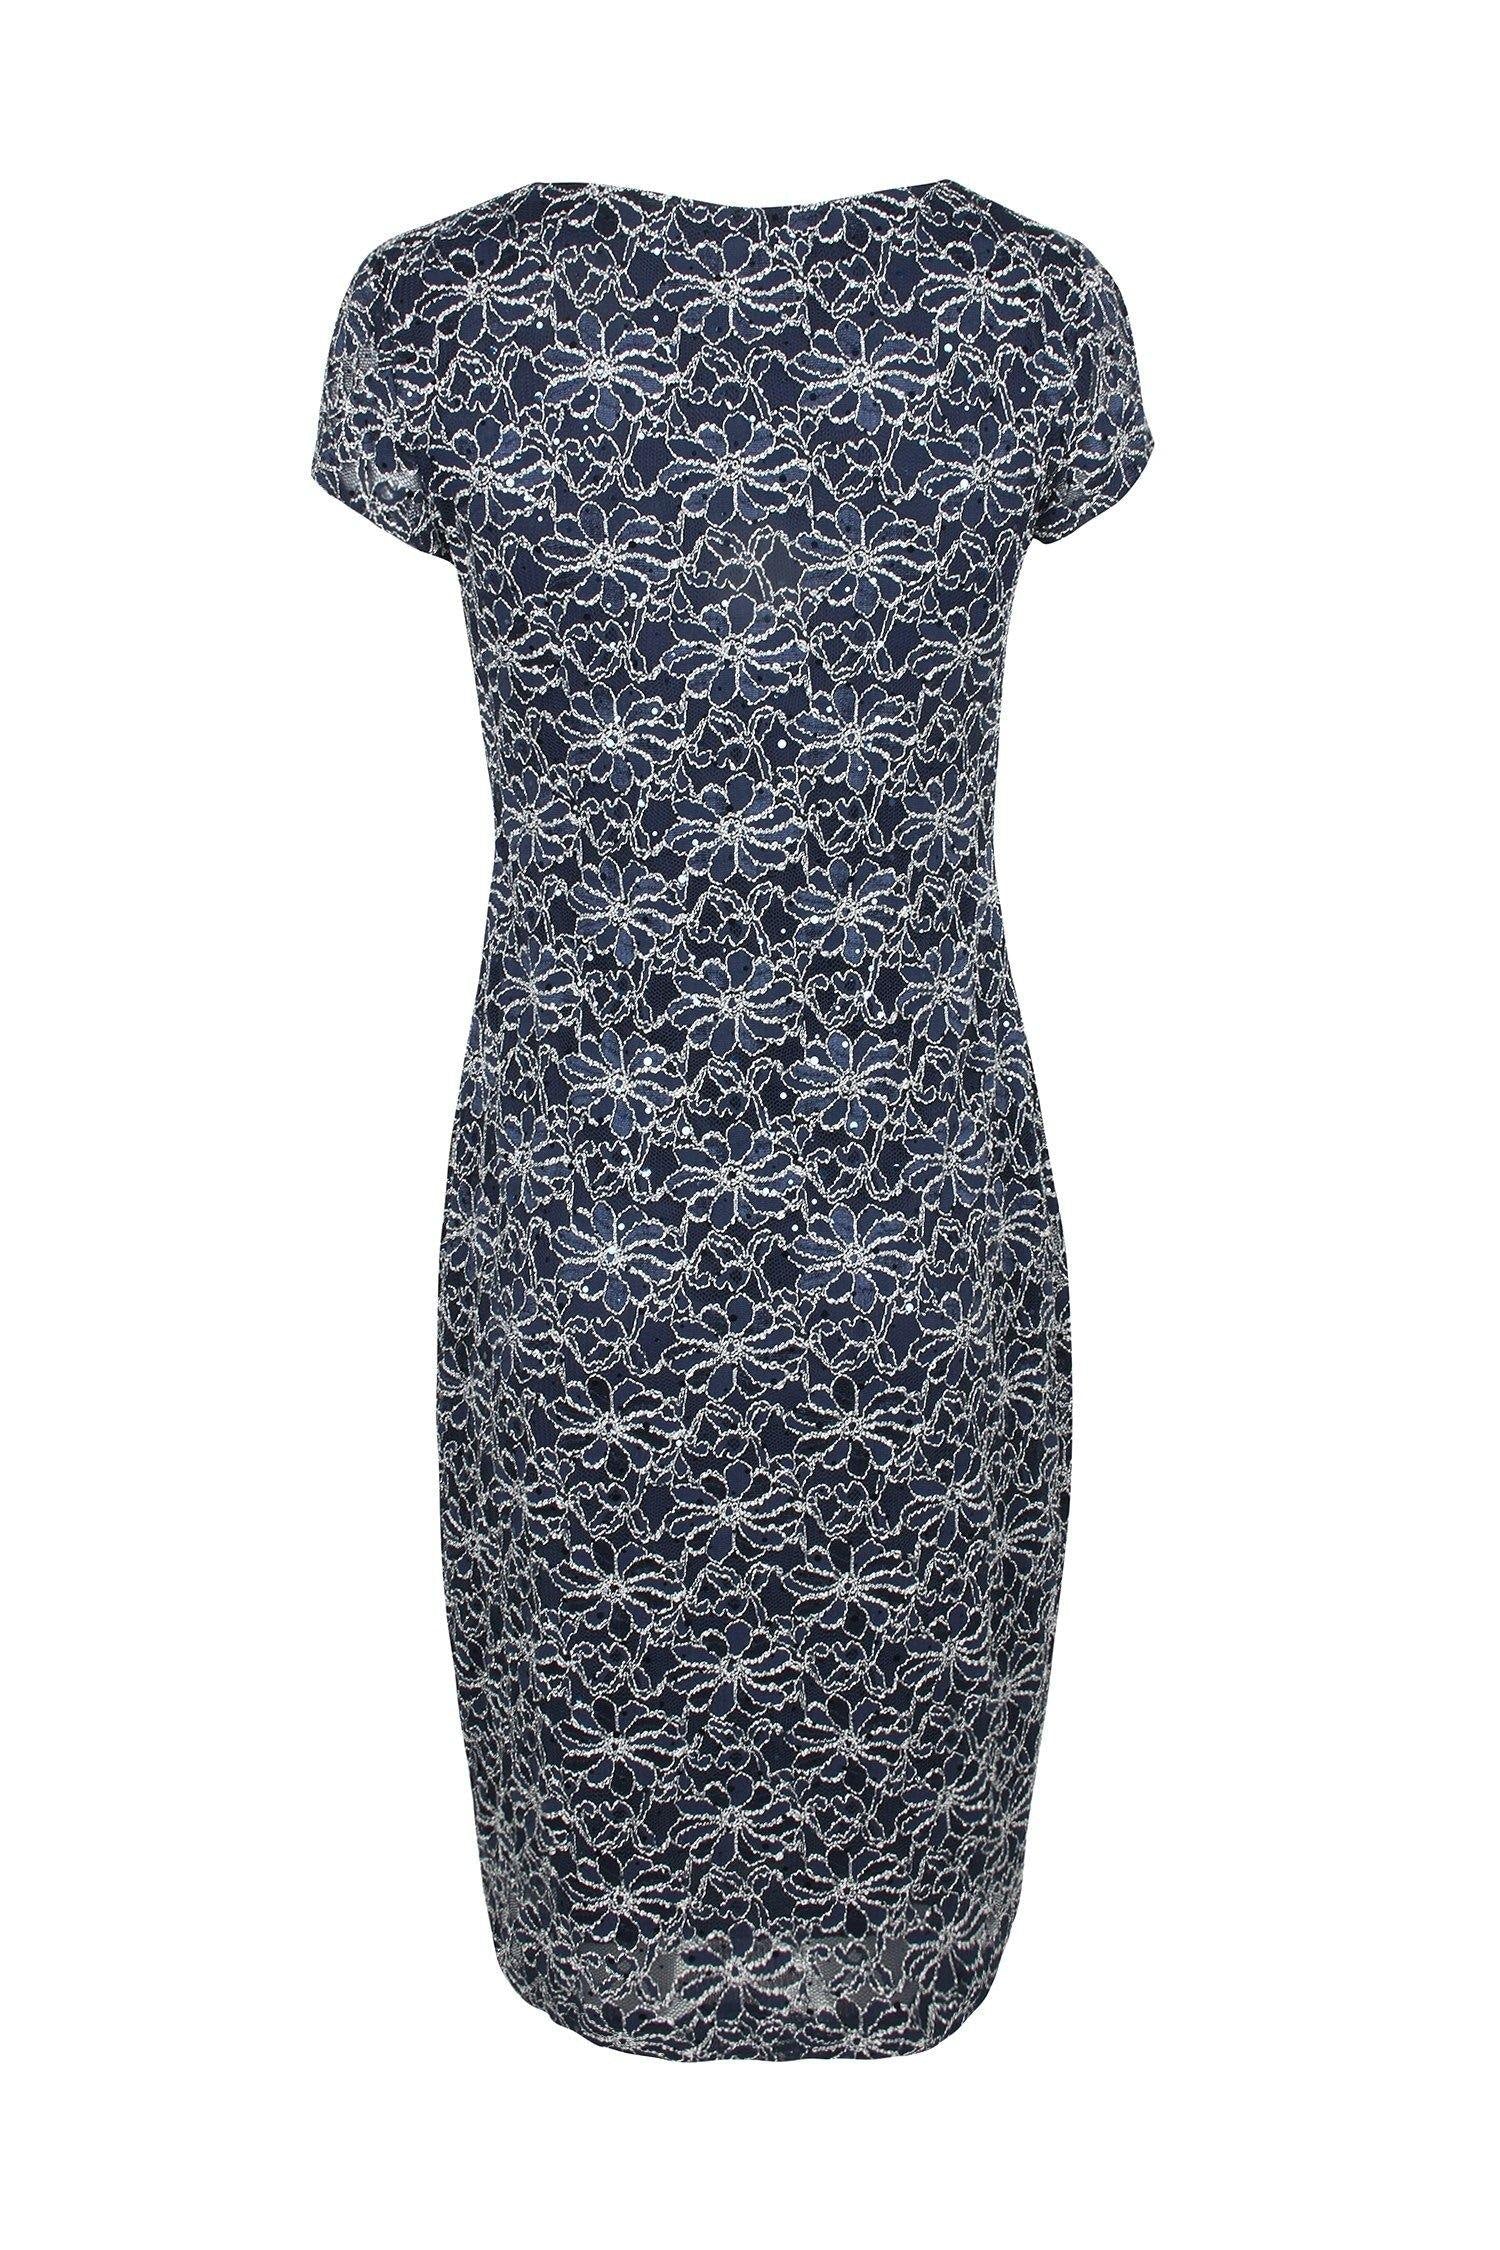 Connected Apparel Short Sleeve Bodycon Lace Dress Sale - The Dress Outlet